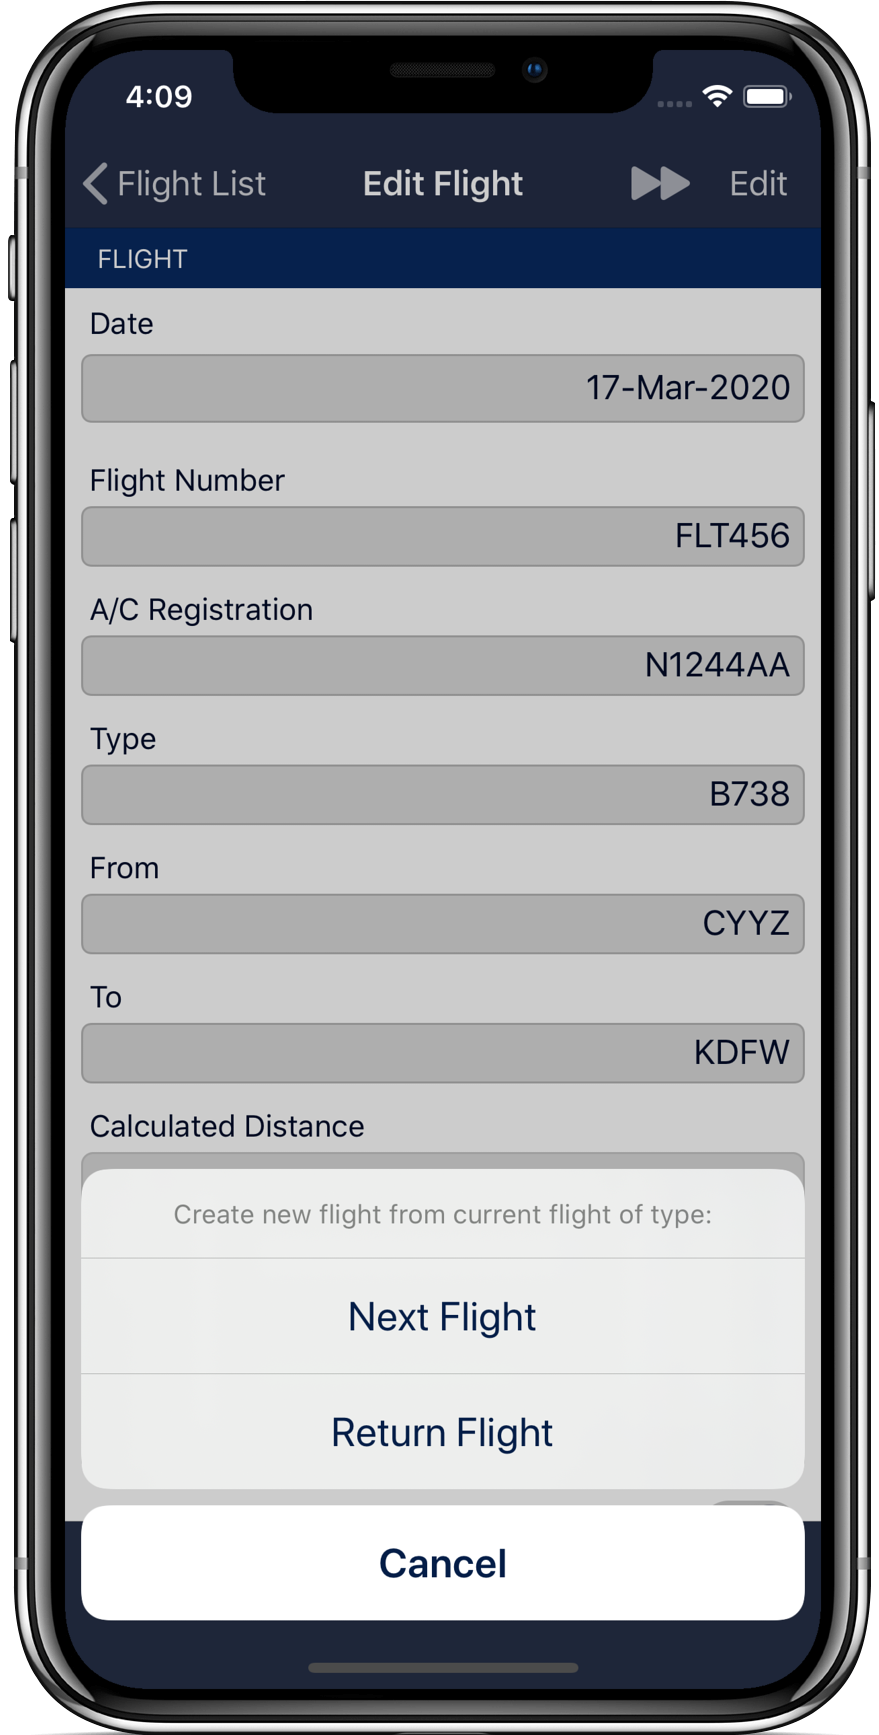 Next flight and return flight feature to pre-fill your next flight